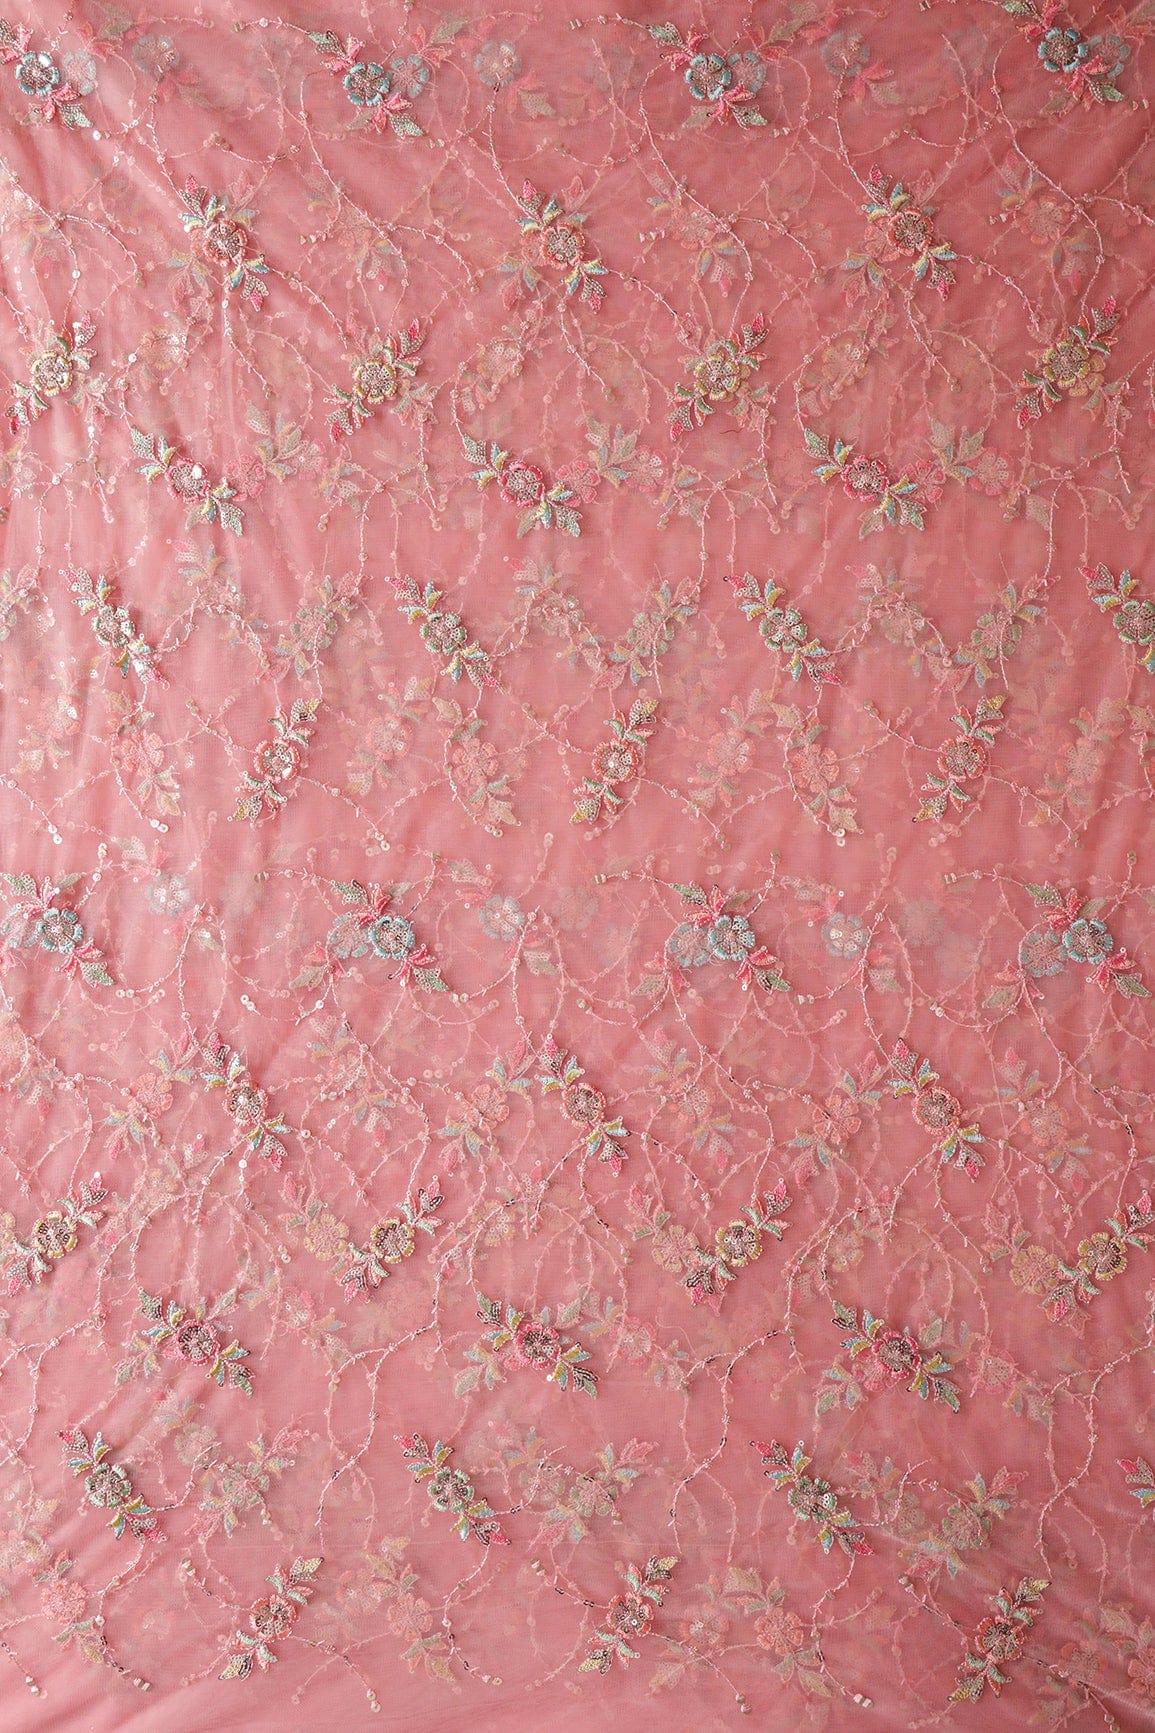 doeraa Embroidery Fabrics Multi Thread With Small Gold Sequins Floral Embroidery On Peach Soft Net Fabric